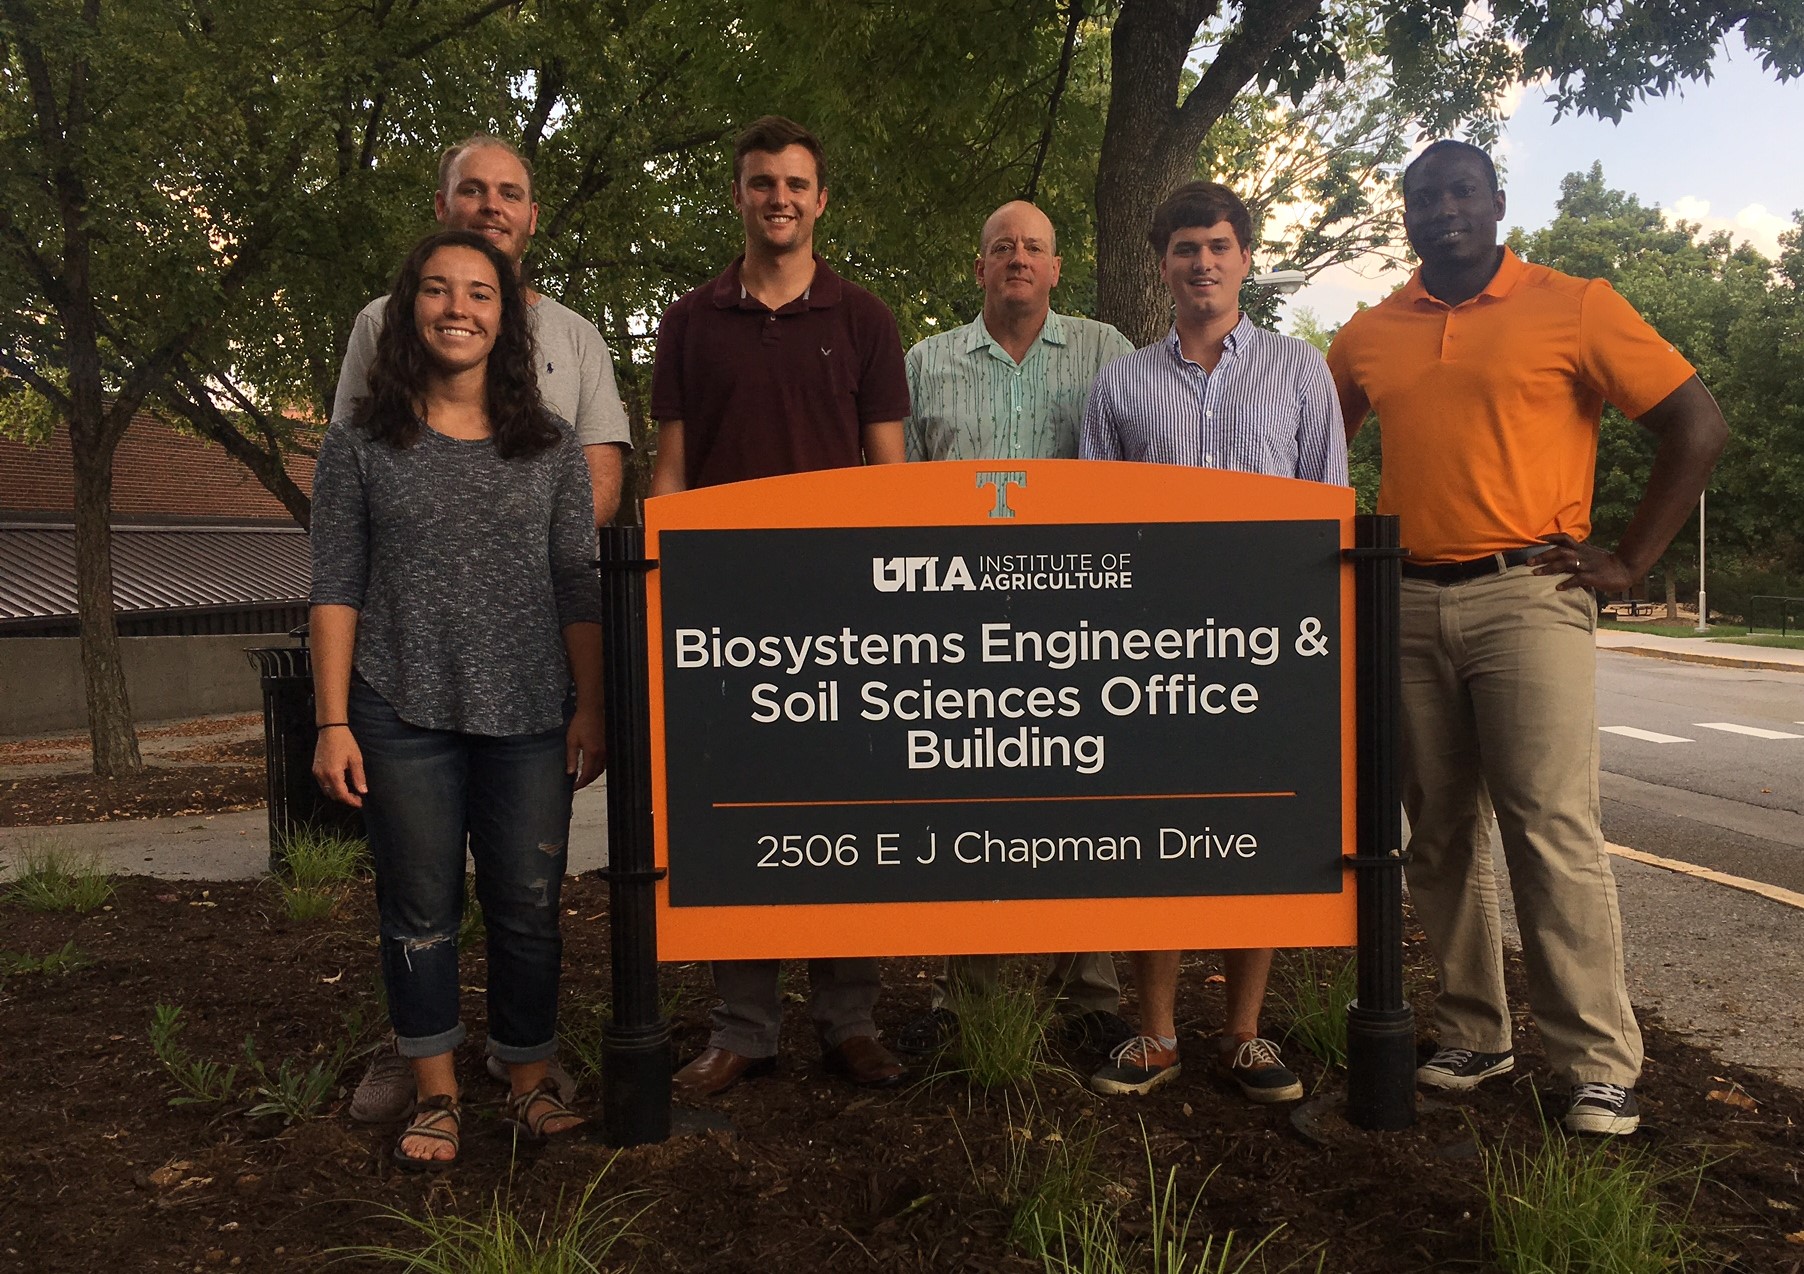 Drs. Abdoulmoumine and Tyner mentored a senior design team that placed first at the ASABE 2017 G.B. Gunlogson Student Environmental Design Competition. Their project was titled 'Design of a Mobile Biochar Unit for On-Site Conversion of Waste Wood'.